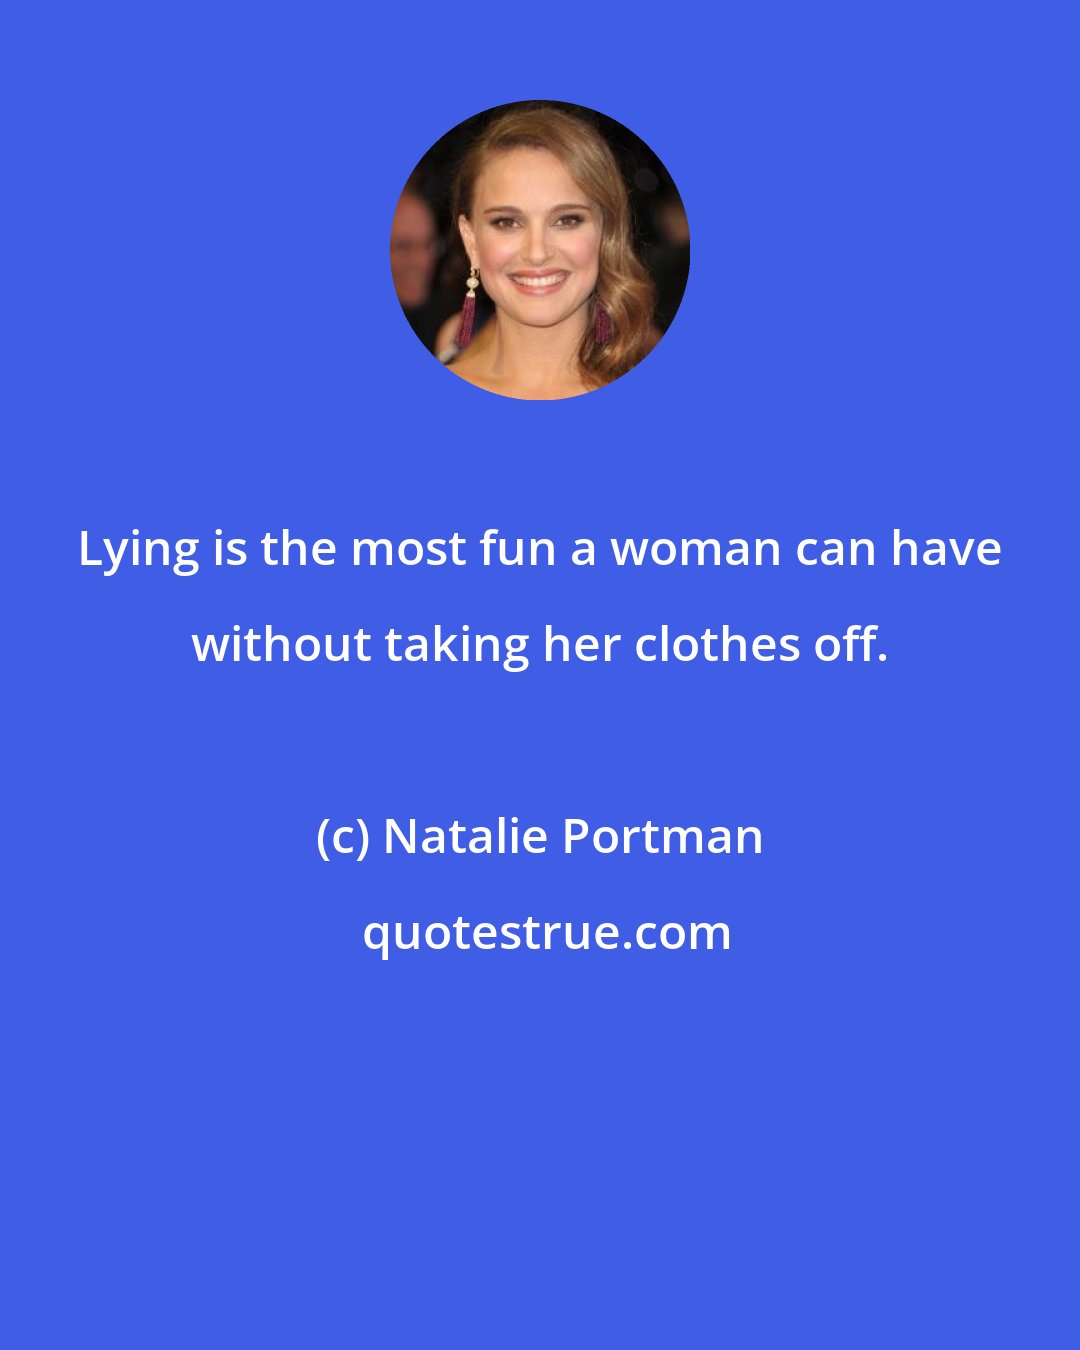 Natalie Portman: Lying is the most fun a woman can have without taking her clothes off.